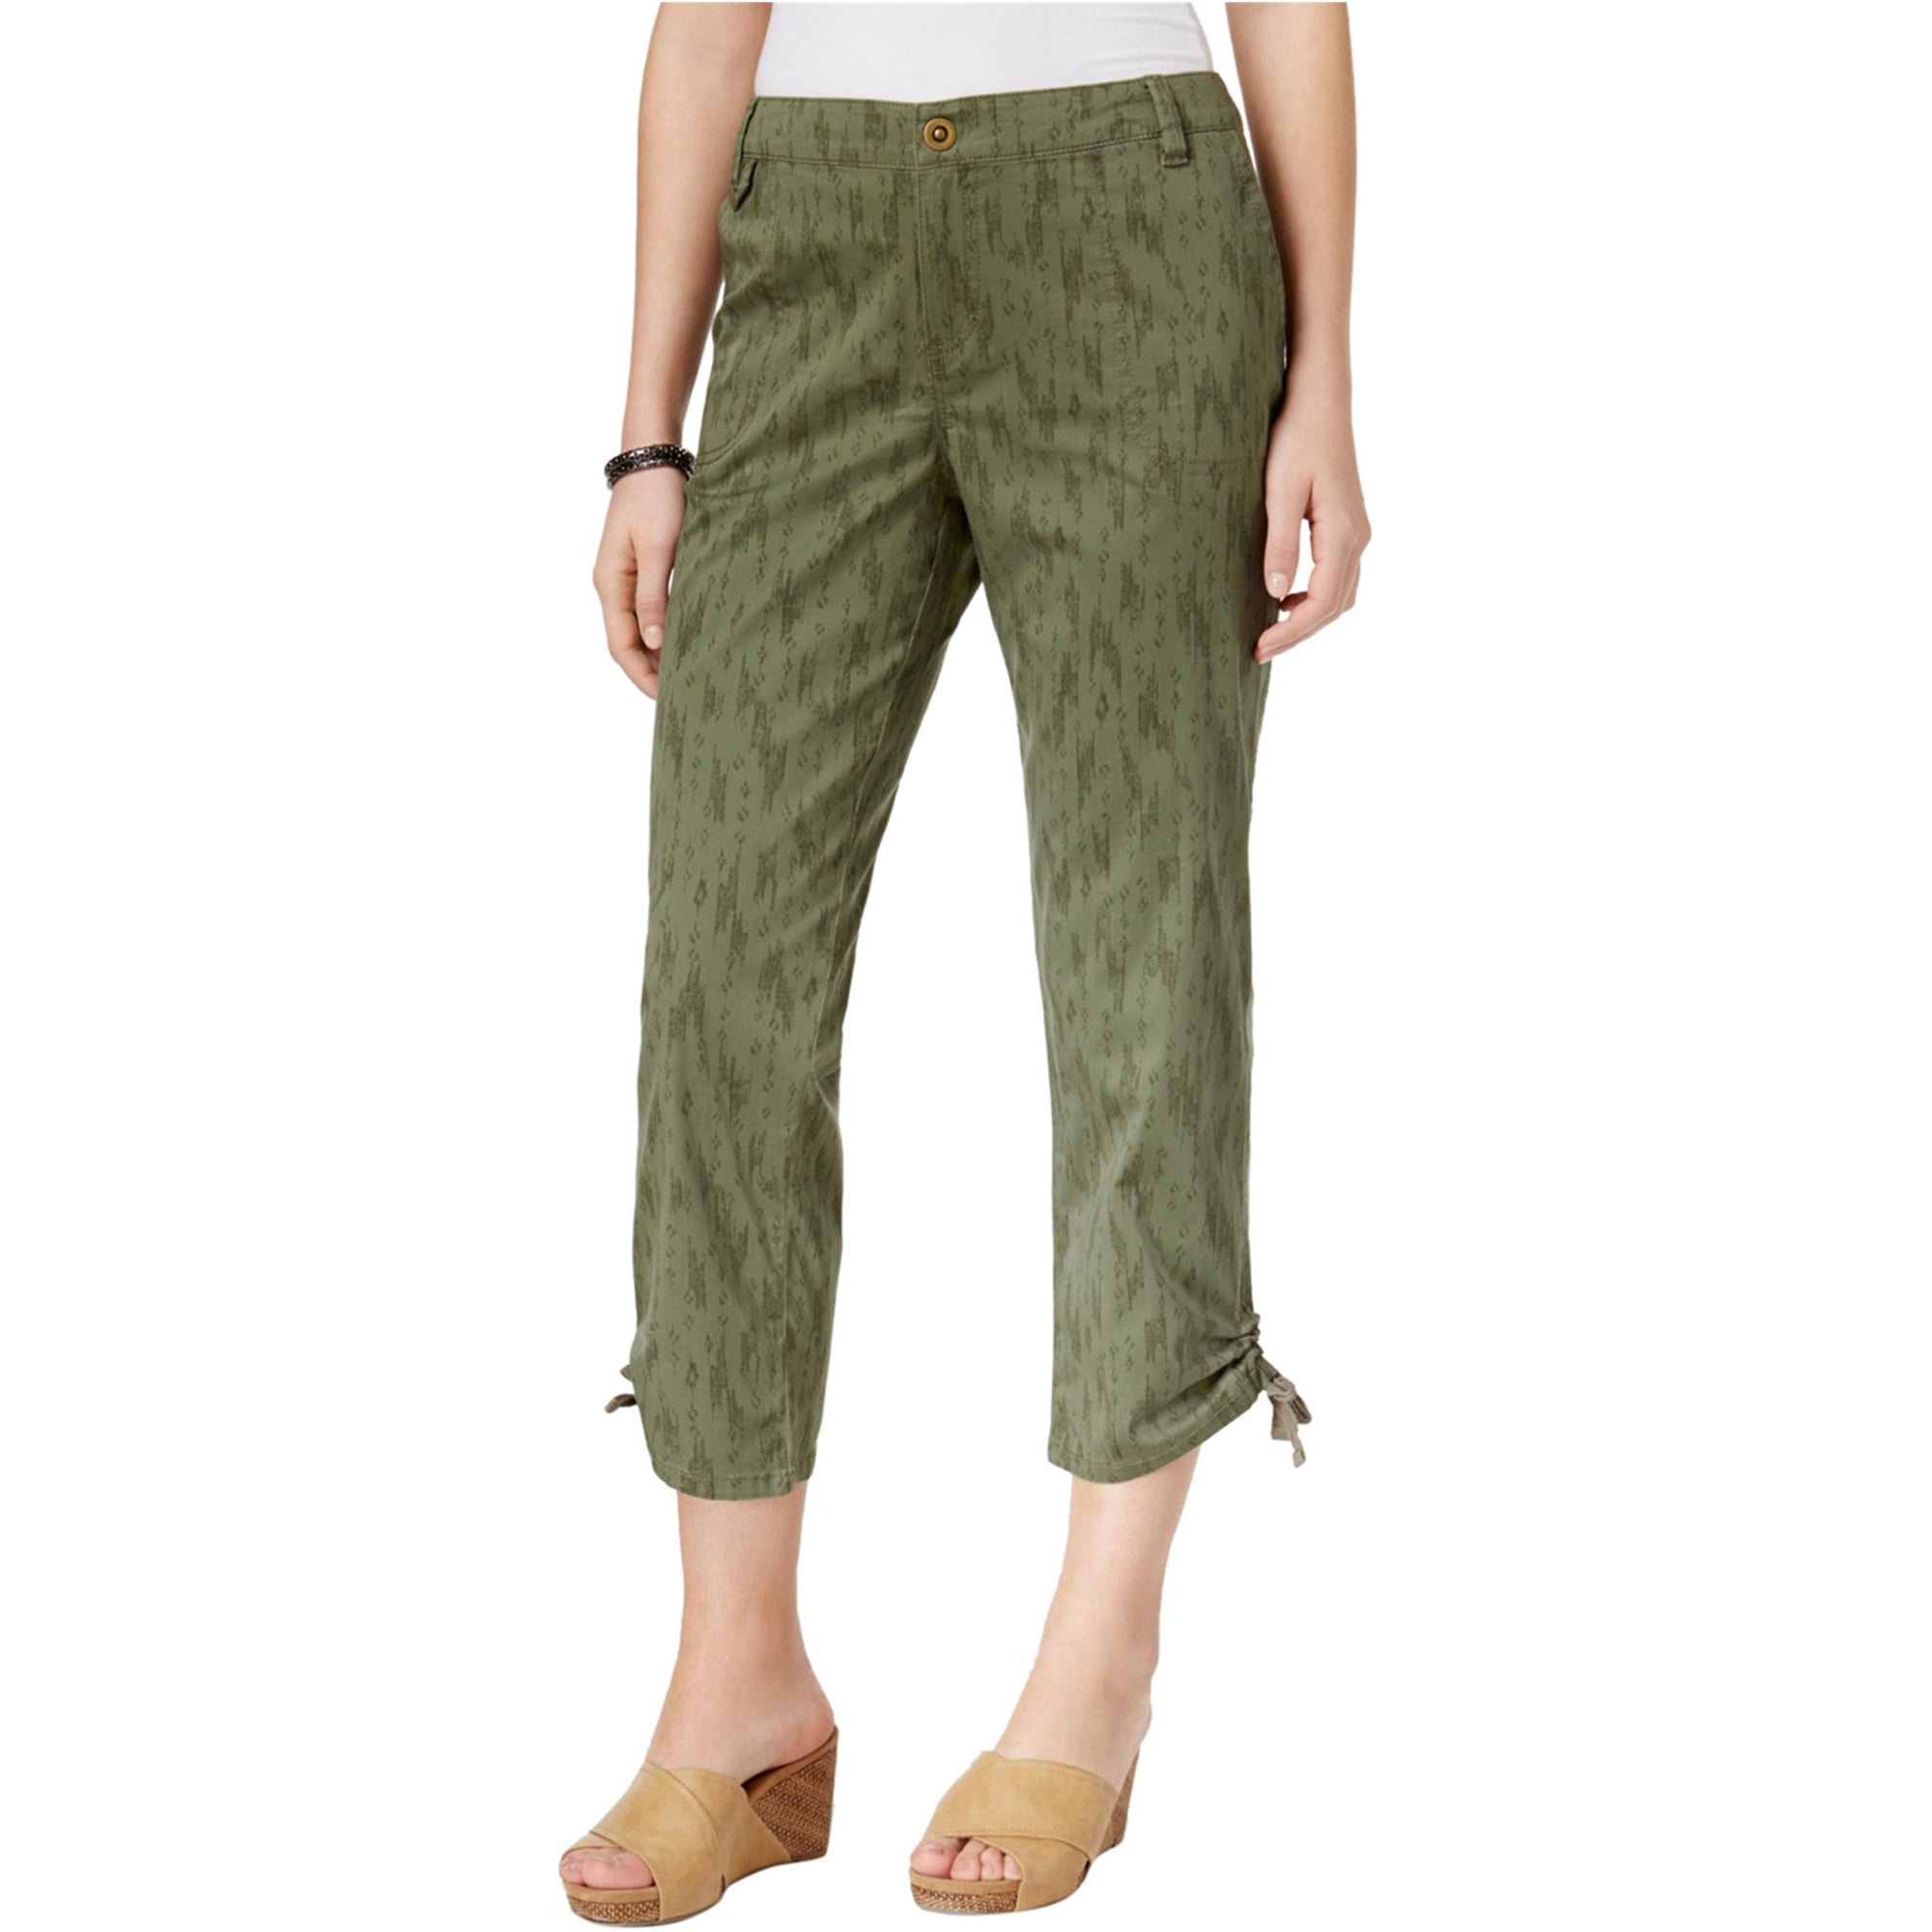 Style & Co Womens Pants Elastic Waist Pull On Ankle Pants Jeans Olive Green $49